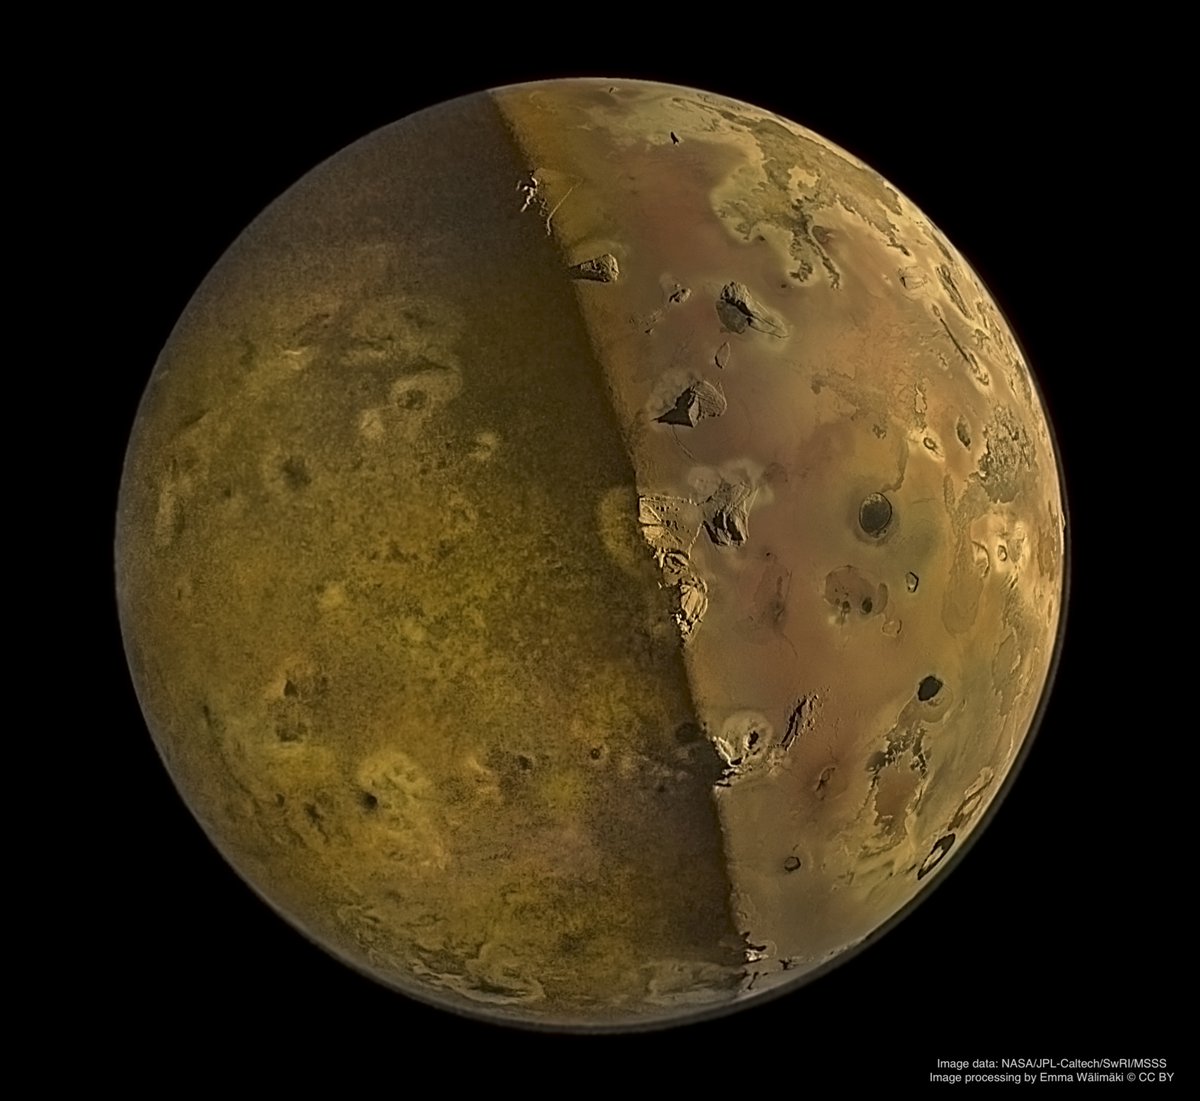 What. A. View. 

NASA's #JunoMission recently captured this spectacular shot of Jupiter's tortured moon Io — the most volcanically active world in the solar system, w/ hundreds of volcanoes, some erupting lava fountains dozens of miles high.

More: missionjuno.swri.edu